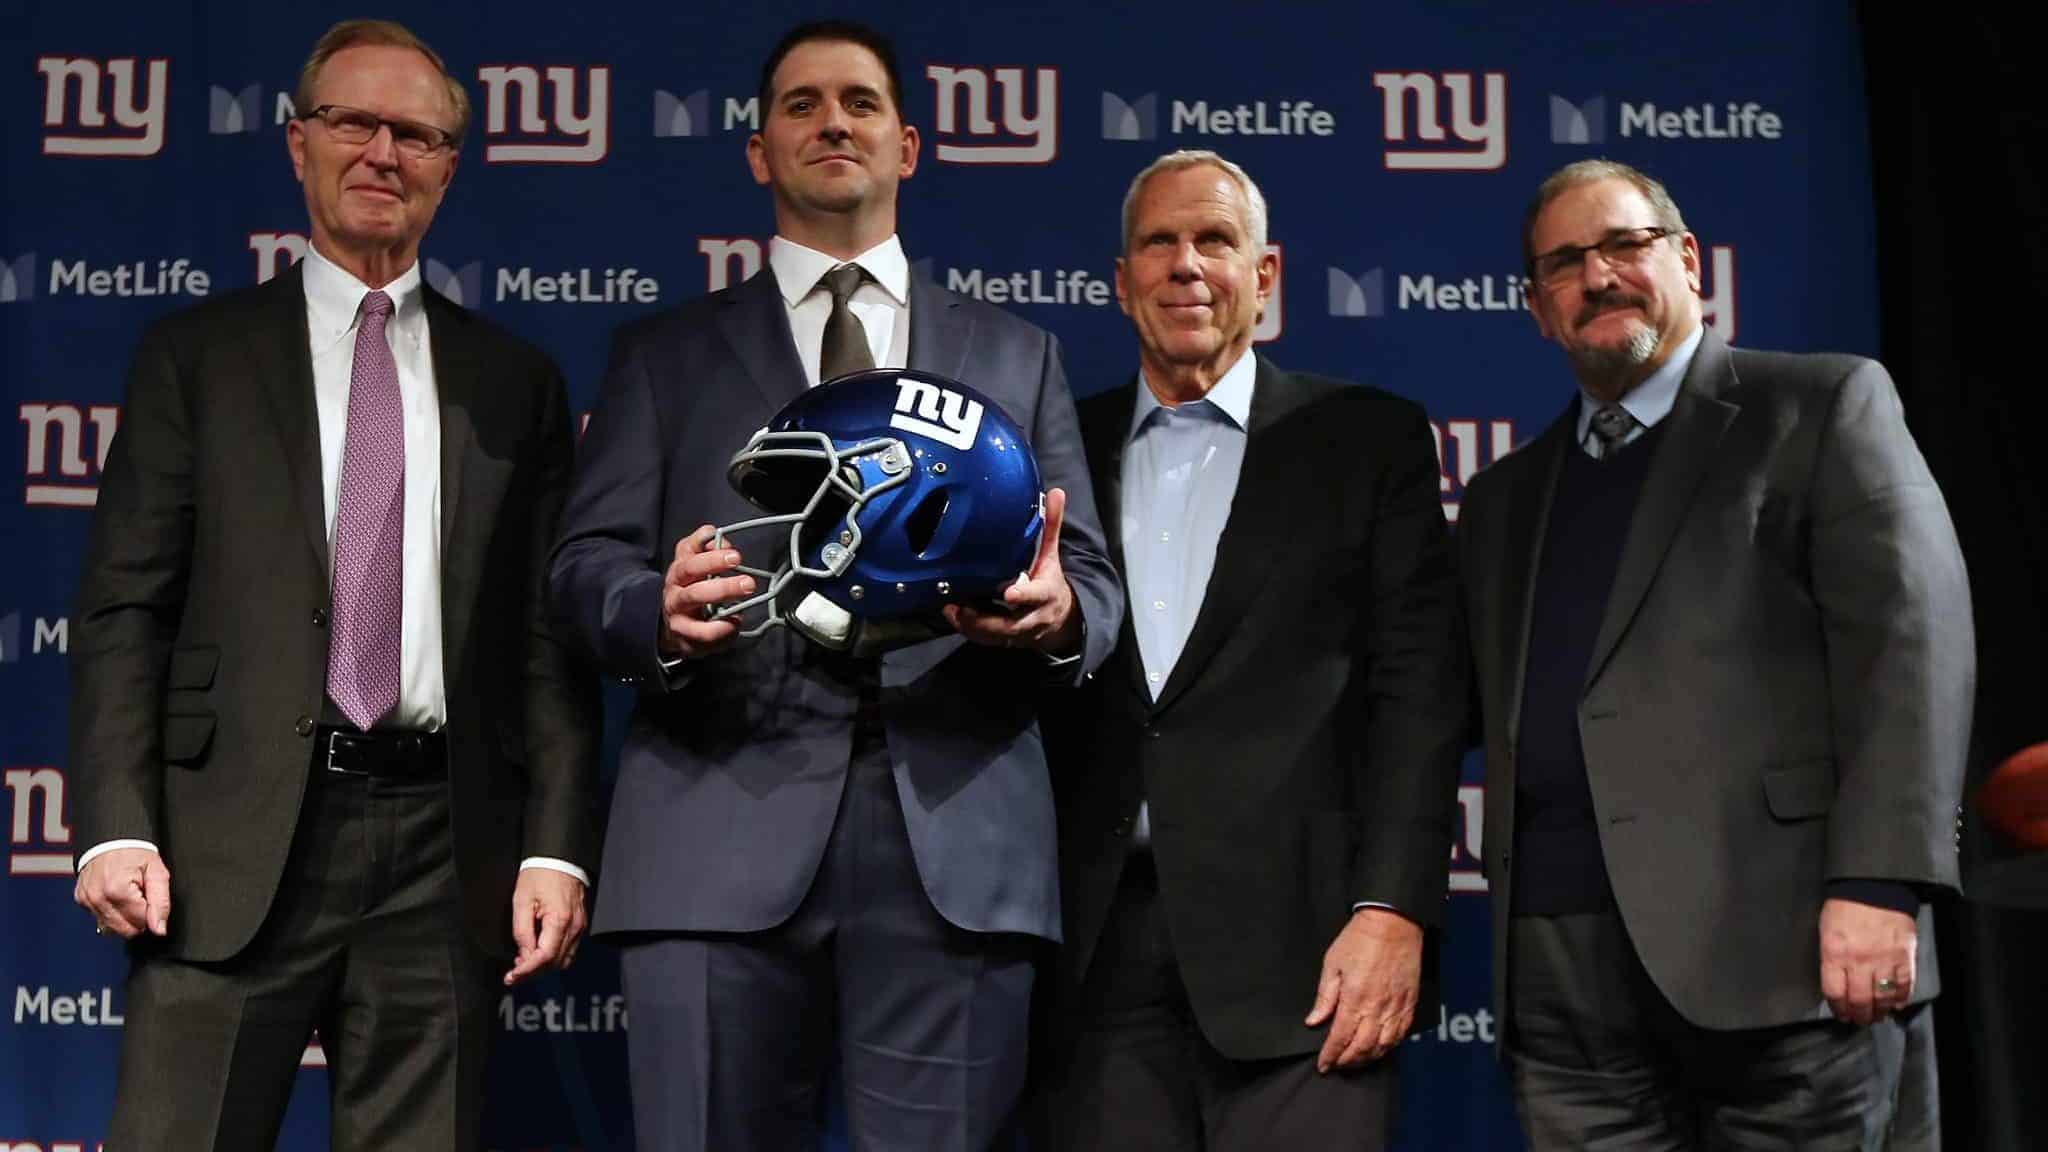 EAST RUTHERFORD, NJ - JANUARY 09: New York Giants new head coach Joe Judge, center, poses for photographs with team CEO John Mara, left, chairman and executive vice president Steve Tisch, and general manager Dave Gettleman, right, after a news conference at MetLife Stadium on January 9, 2020 in East Rutherford, New Jersey.